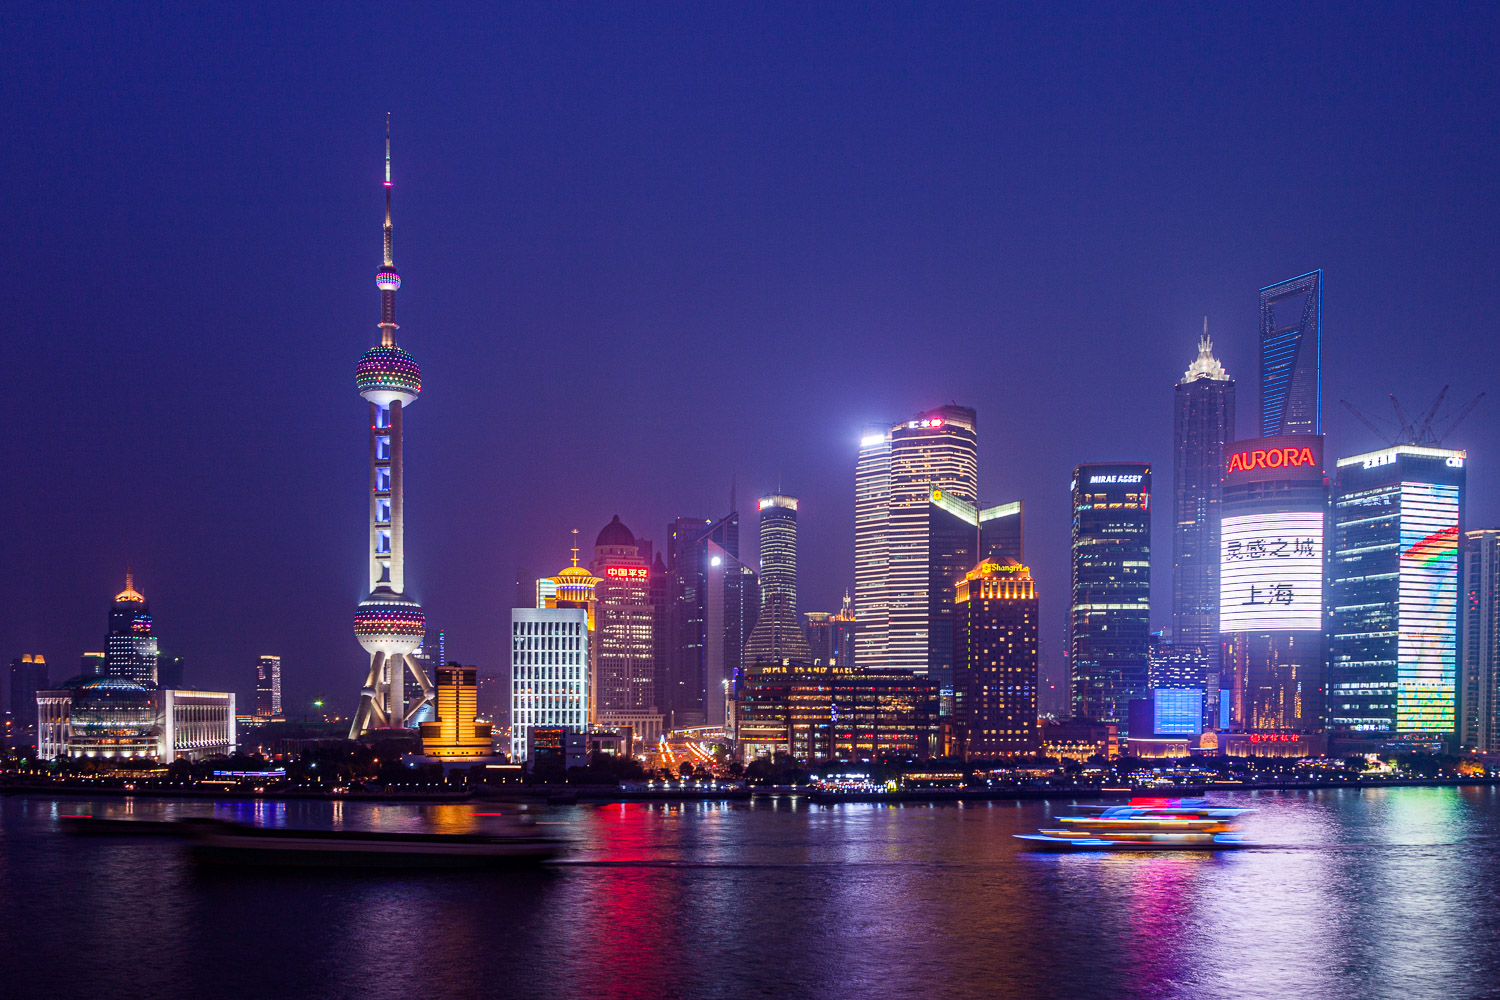 Night photo of Pudong in Shanghai